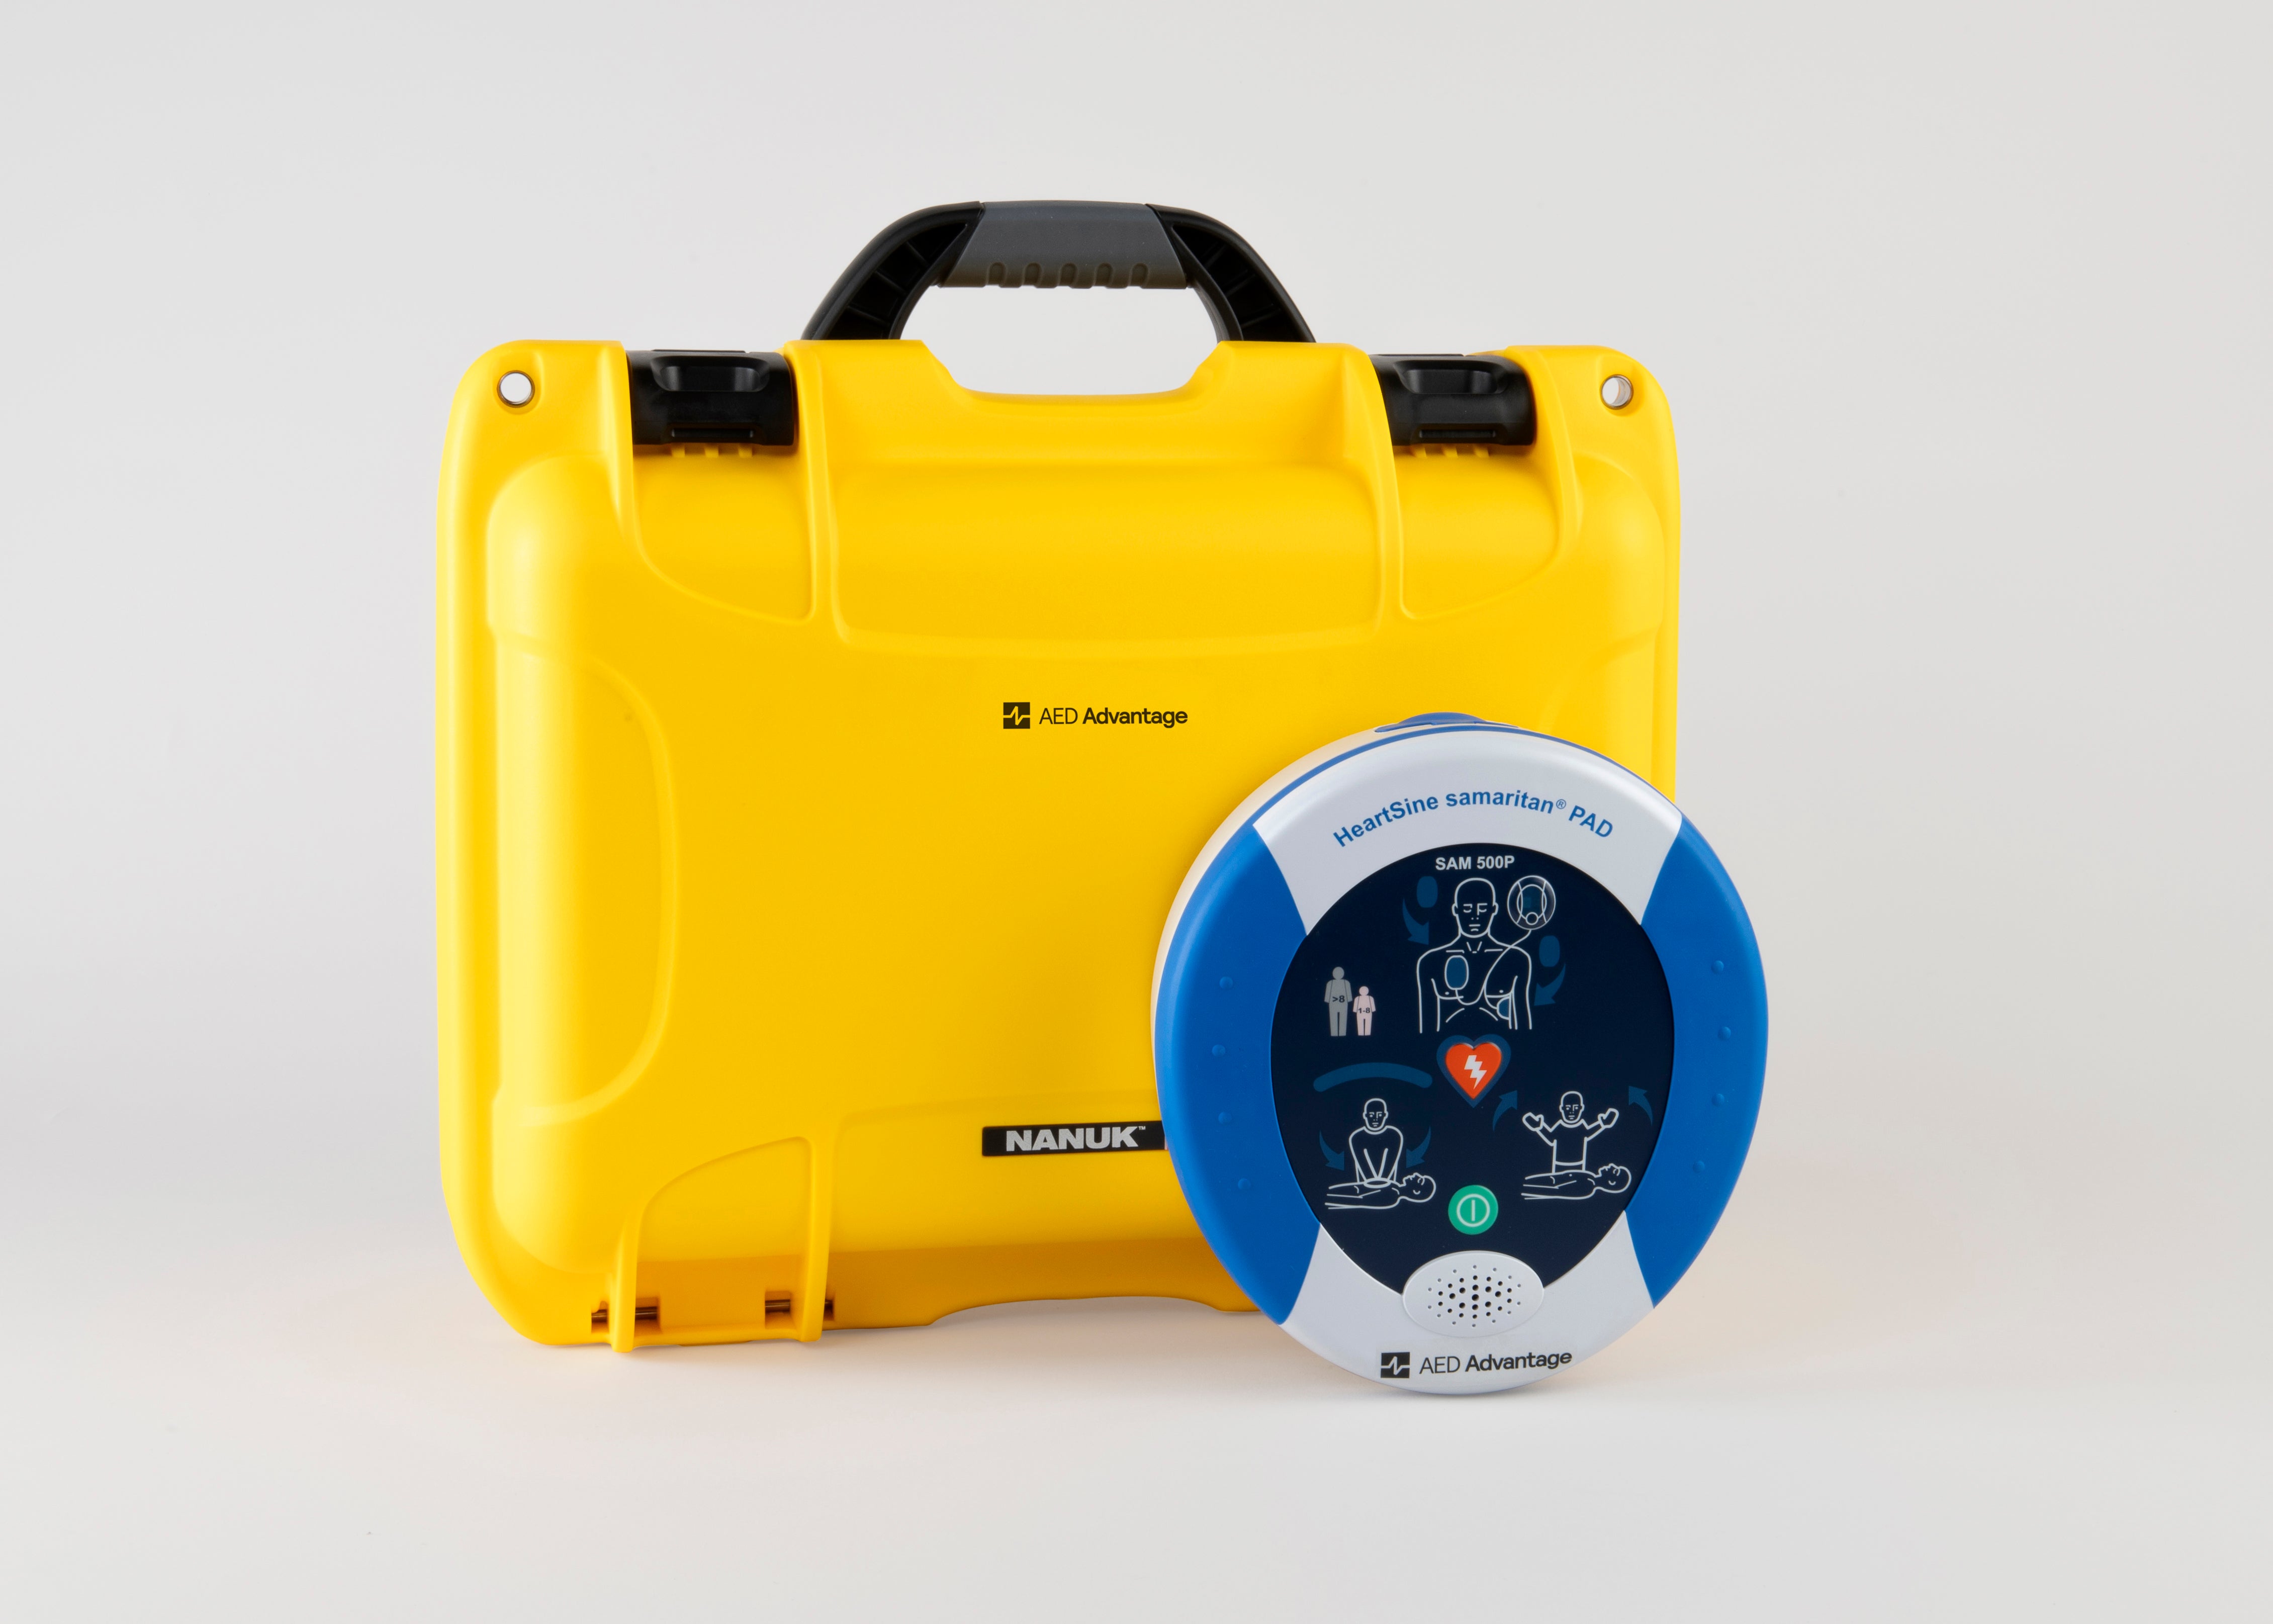 A blue and white HeartSine AED standing next to a bright yellow hardcase